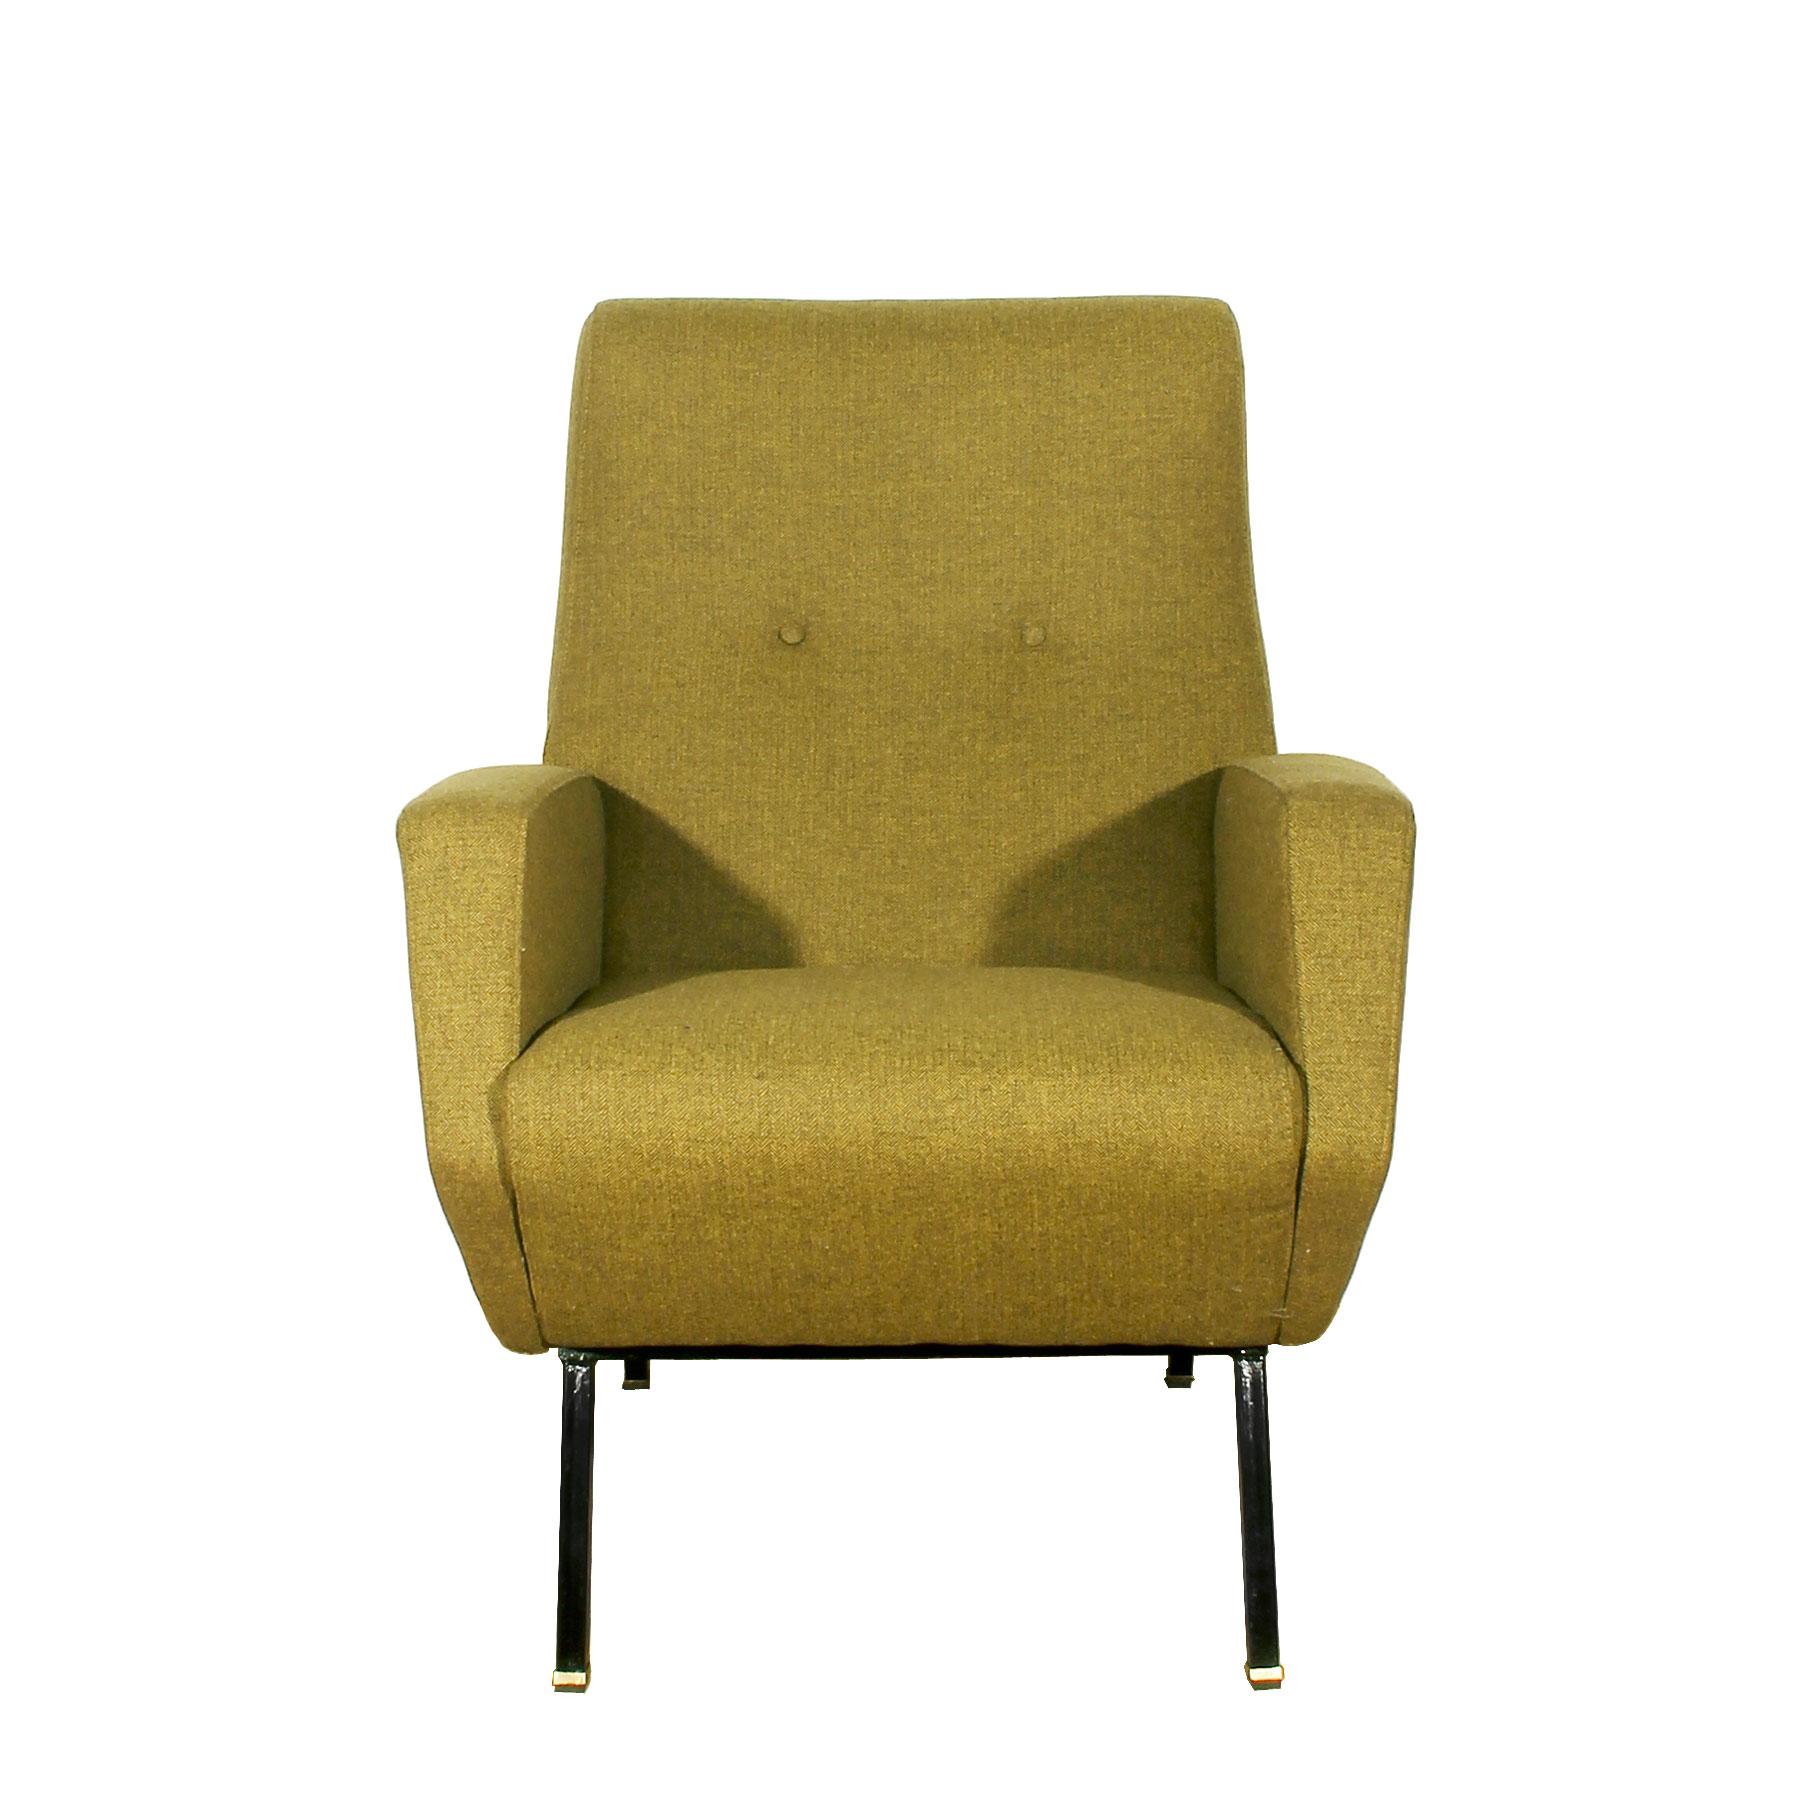 Italian Pair of Mid-Century Modern Armchairs in New Mottled Yellow Fabric - Italy, 1960s For Sale